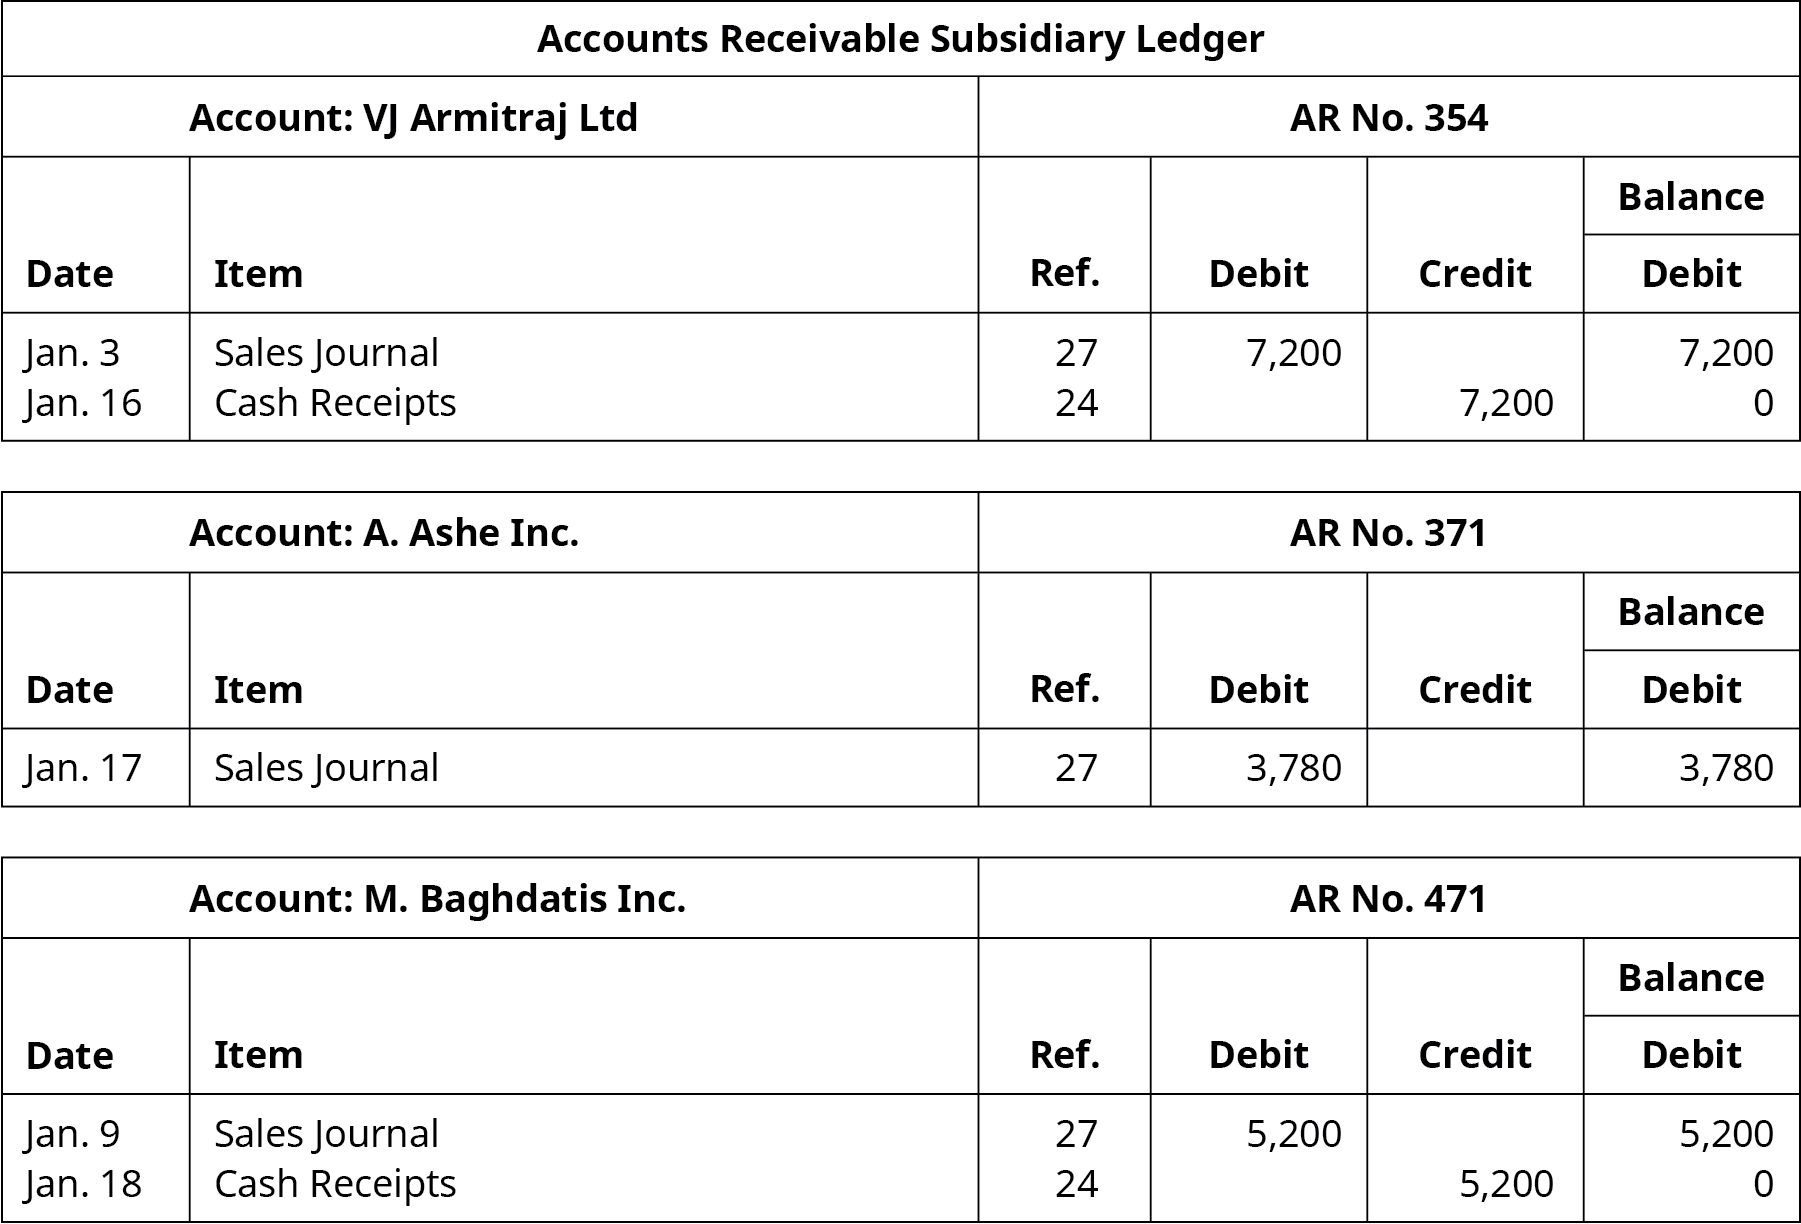 Accounts Receivable Subsidiary Ledger. Six columns, labeled left to right: Date, Item, Reference, Debit, Credit, Balance. VJ Armitraj Ltd; Account Number 354. Line One: January 3; Sales Journal; 27; 7,200; Blank; 7,200. Line Two: January 16; Cash Receipts; 24; Blank; 7,200; Blank. A. Ashe Inc; Account Number 371. Line One: January 17; Sales Journal; 27; 3,780; Blank; 3,780. M. Baghdatis Inc; Account Number 471. Line One: January 9; Sales Journal; 27; 5,200; Blank; 5,200. Line Two: January 18; Cash Receipts; 24; Blank; 5,200; Blank.